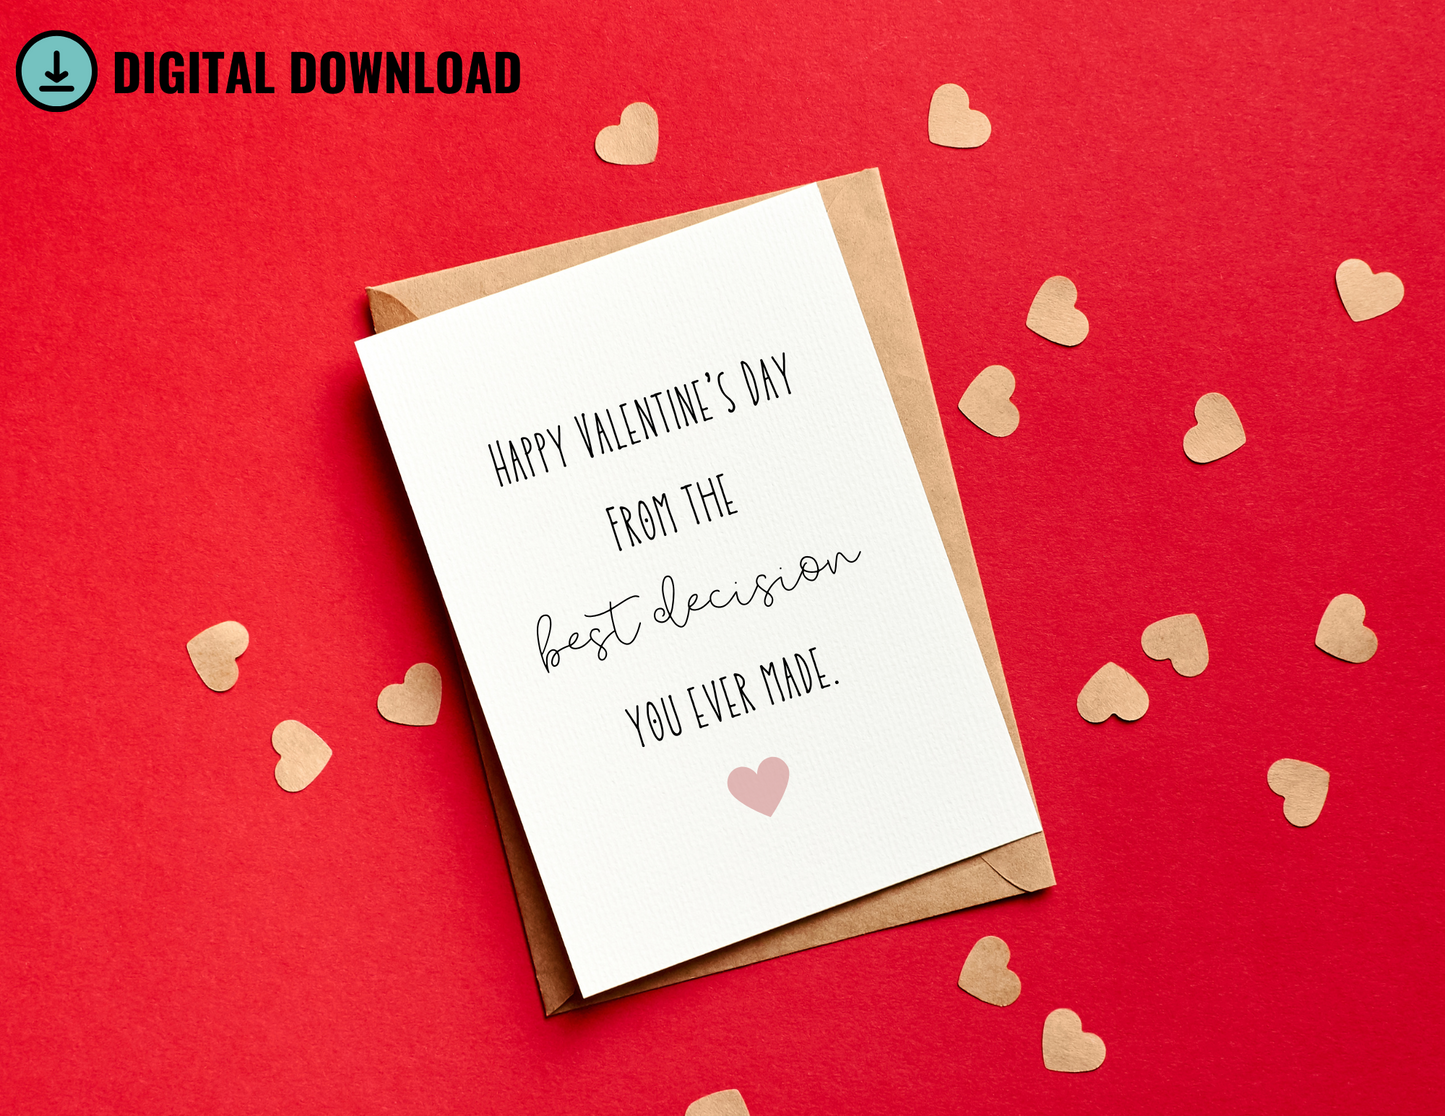 Your Best Decision Printable 5 x 7 " plus Bonus Greeting Card for best friend, husband, wife, boyfriend, girlfriend just Because, Valentine's Day